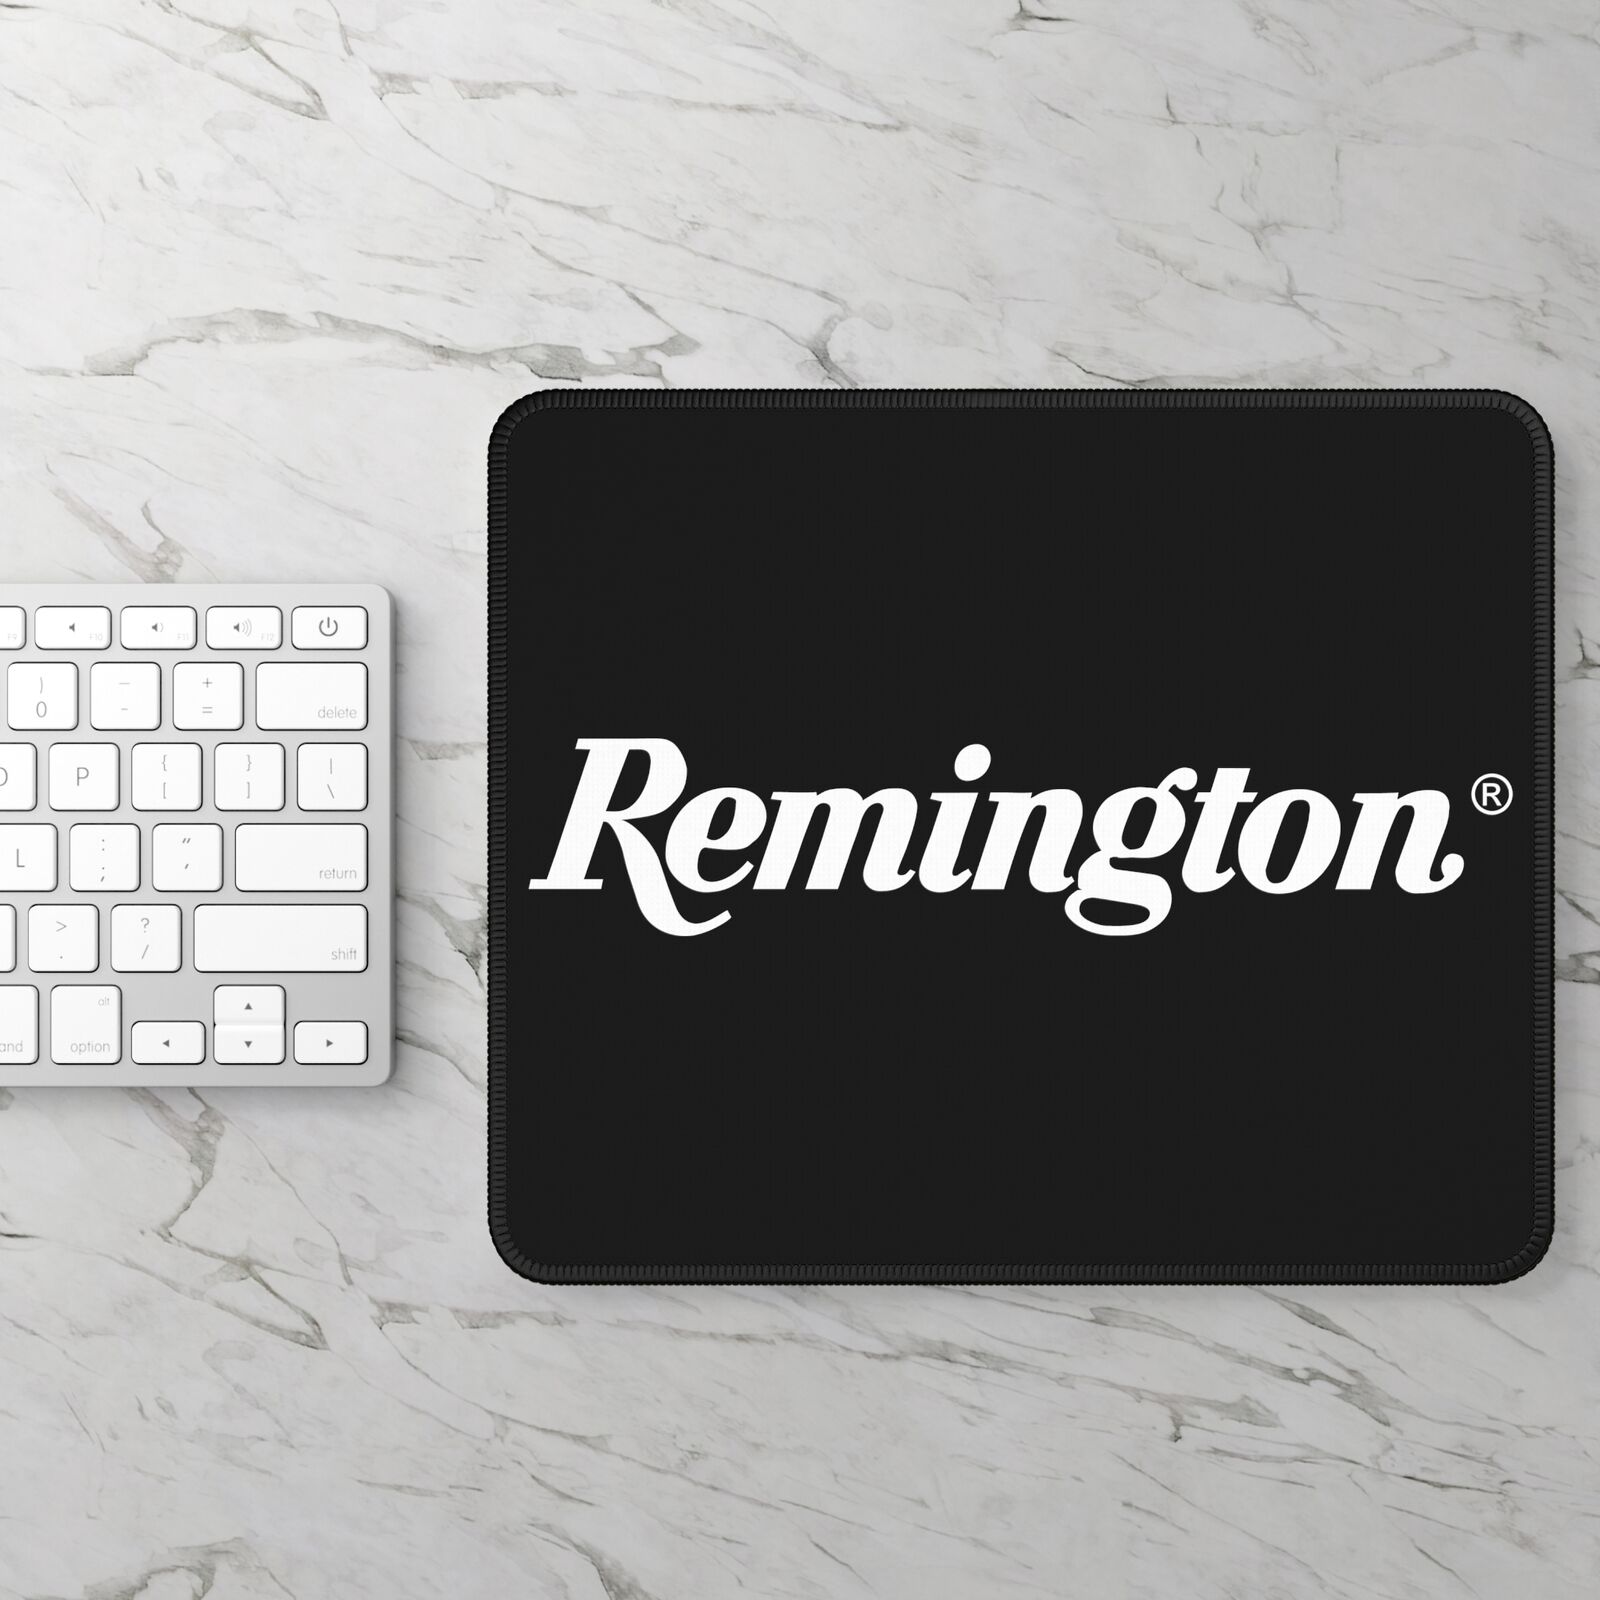 Remington Firearms - Gun Enthusiast Collector Gift - High Quality Mouse Pad 9x7